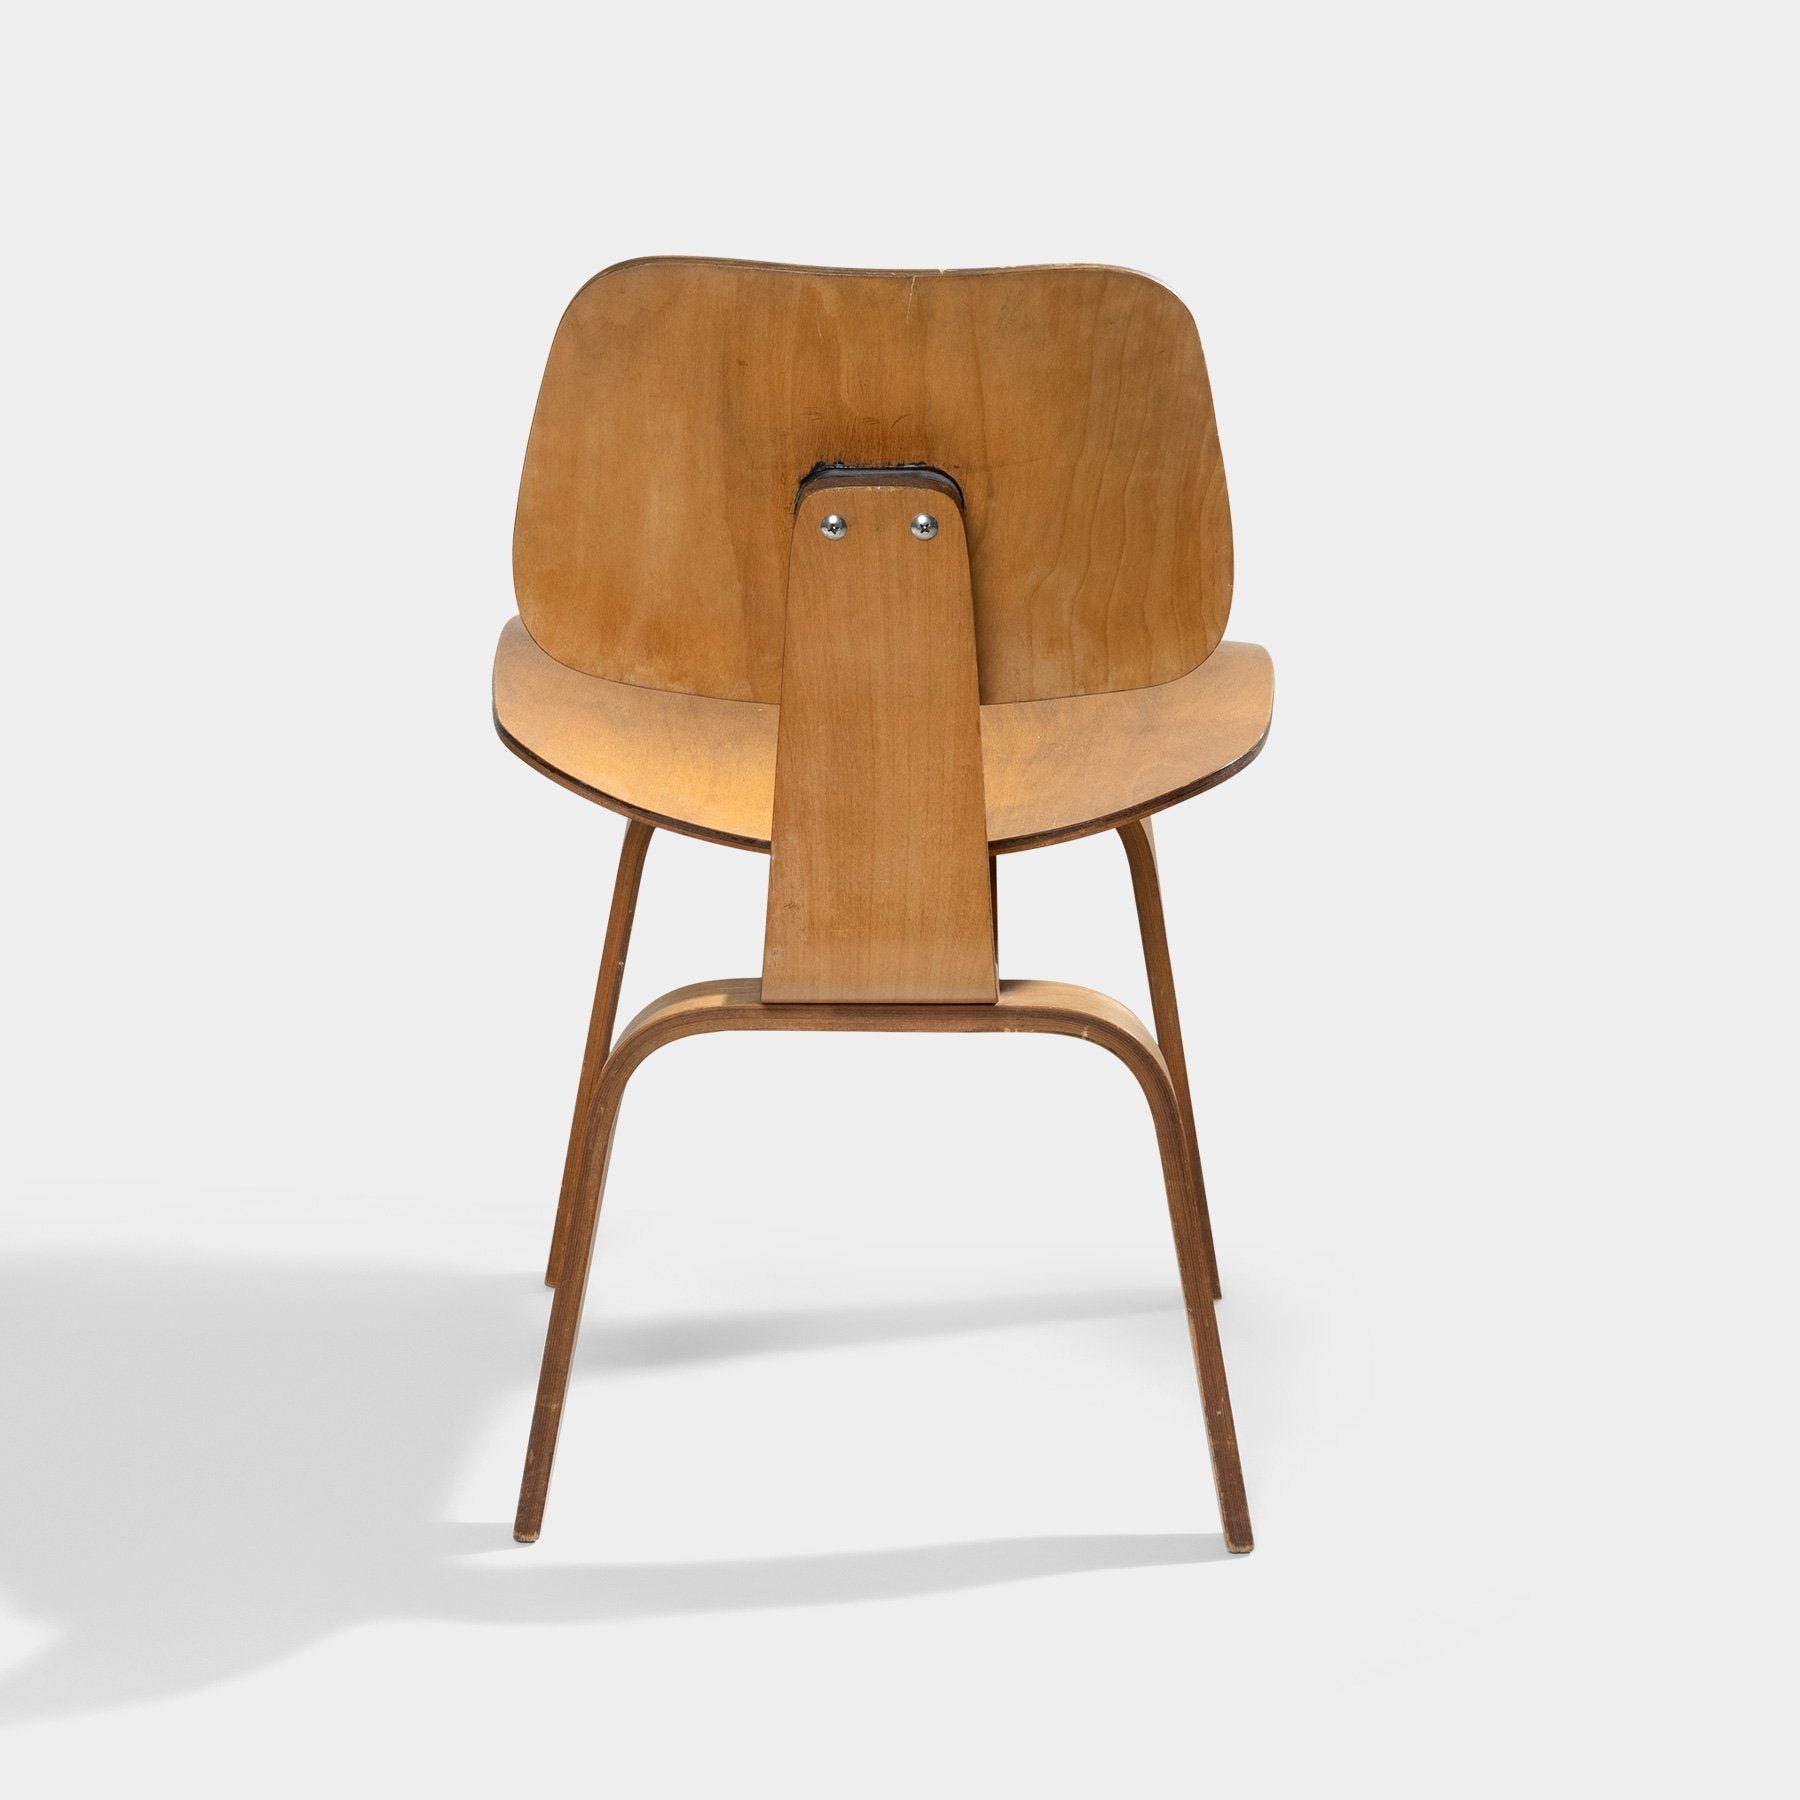 1950s Eames DCW Wood Dining Chair